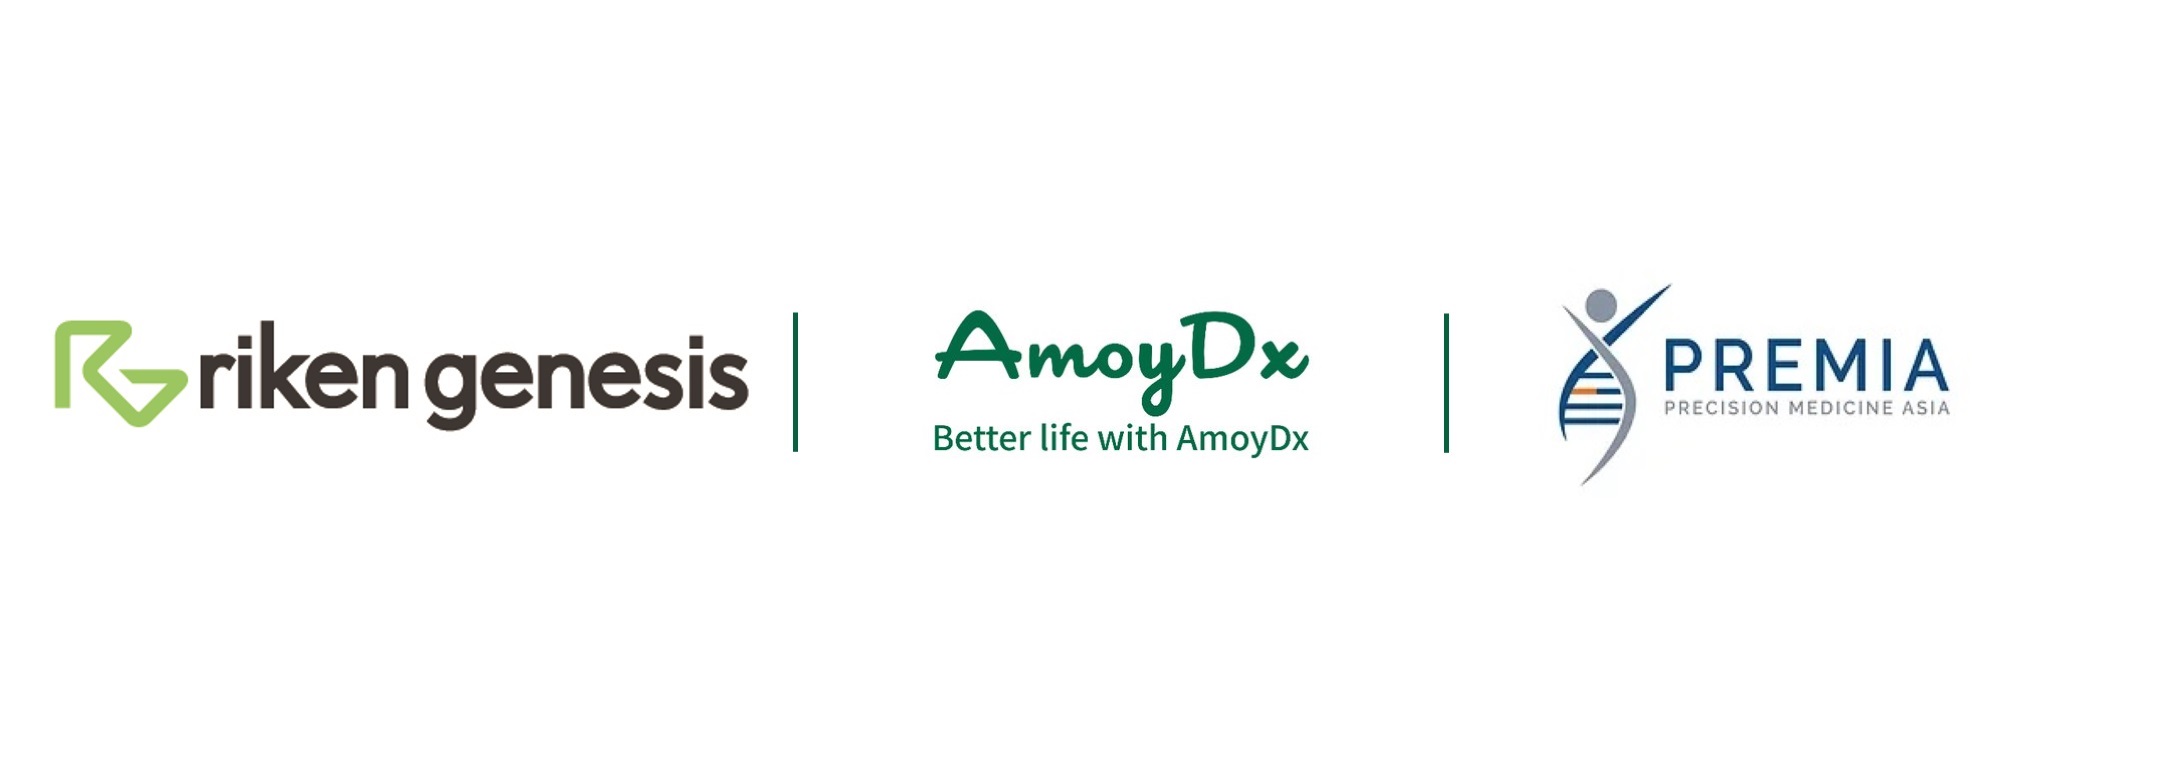 AmoyDx® Pan Lung Cancer PCR Panel  Approved in Japan as a Companion Diagnostic for selpercatinib RET fusion positive NSCLC